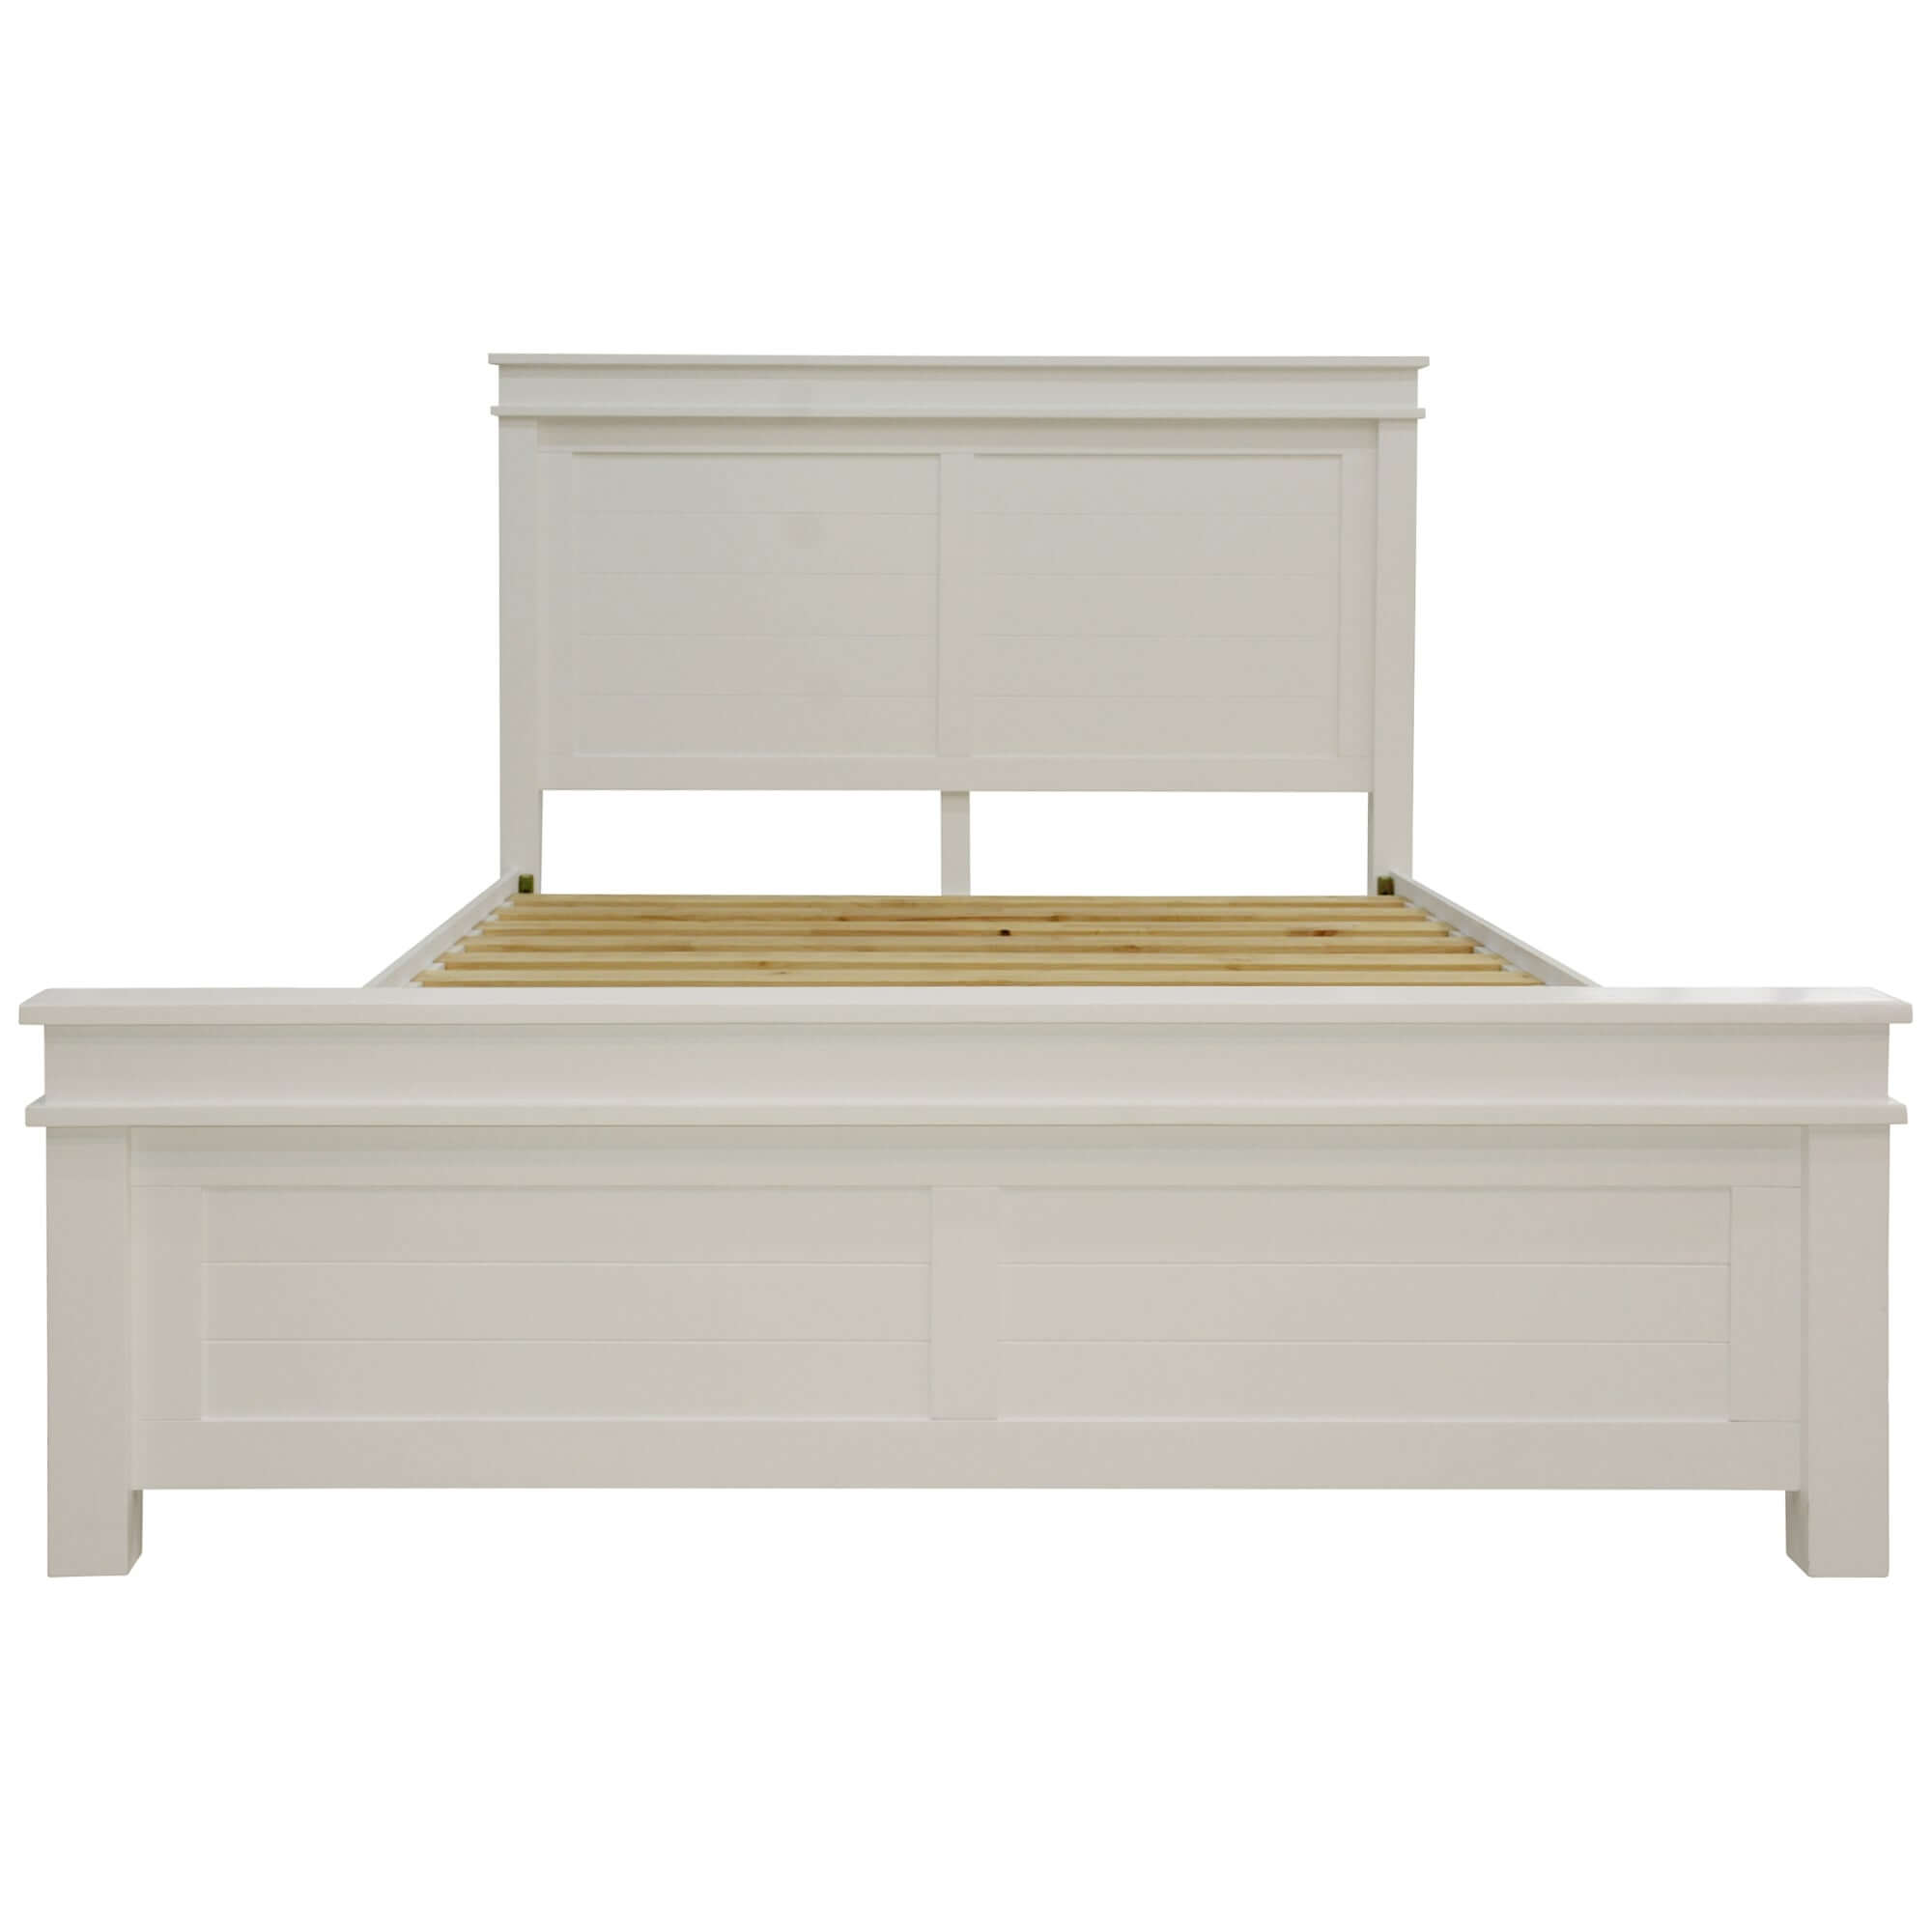 Lily Queen Bed Frame - Storage & Style | White Timber-Upinteriors